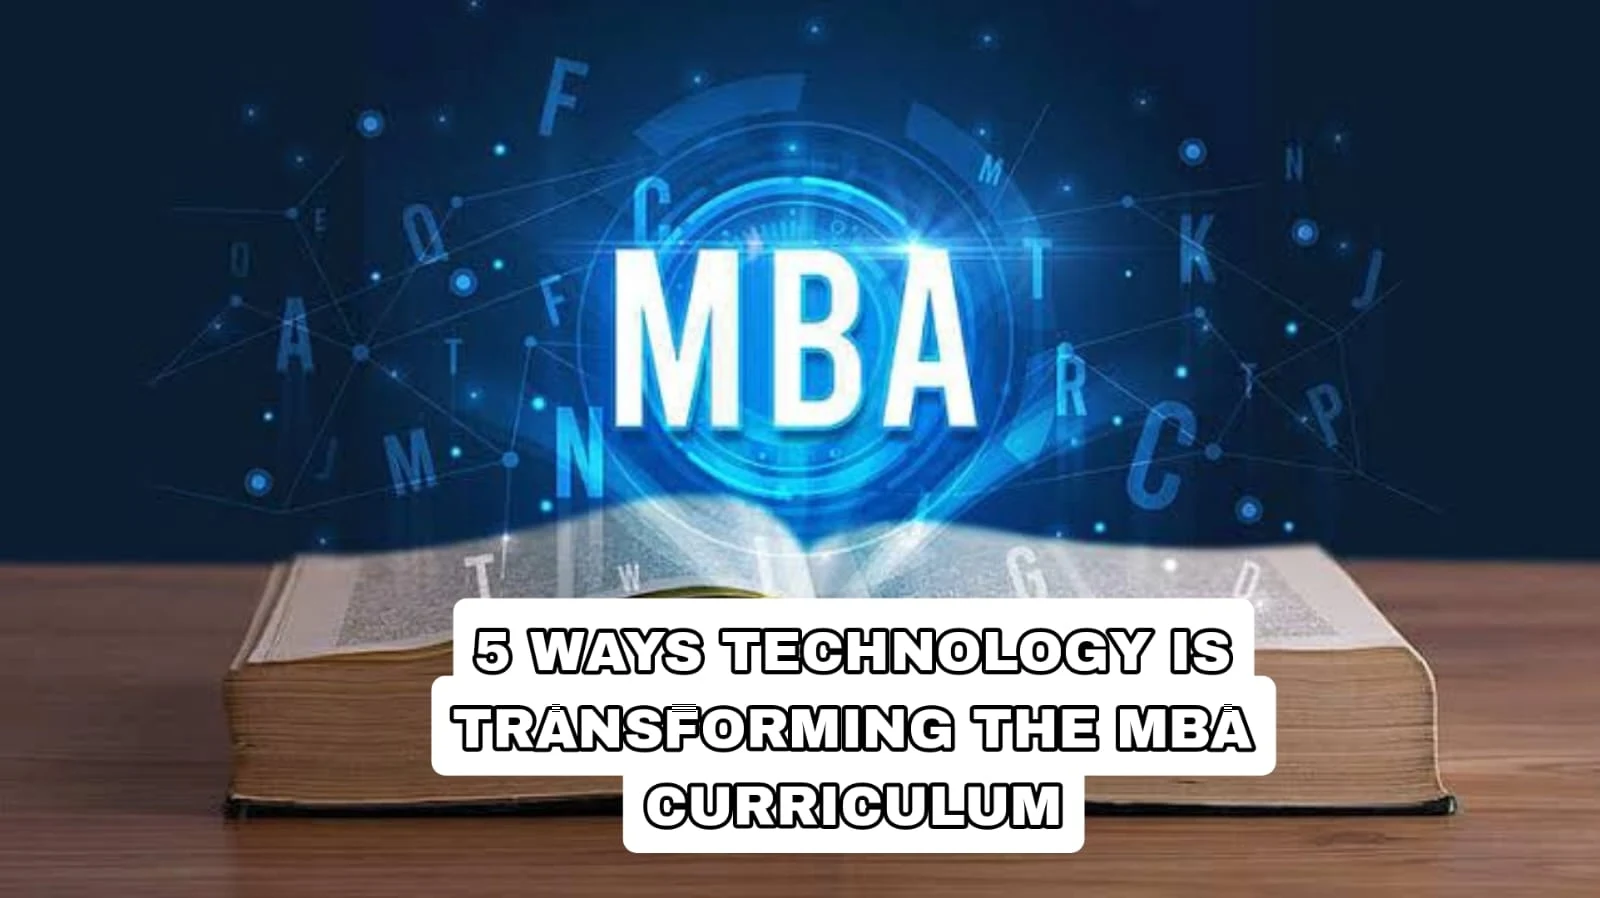 5 ways technology is transforming the MBA curriculum